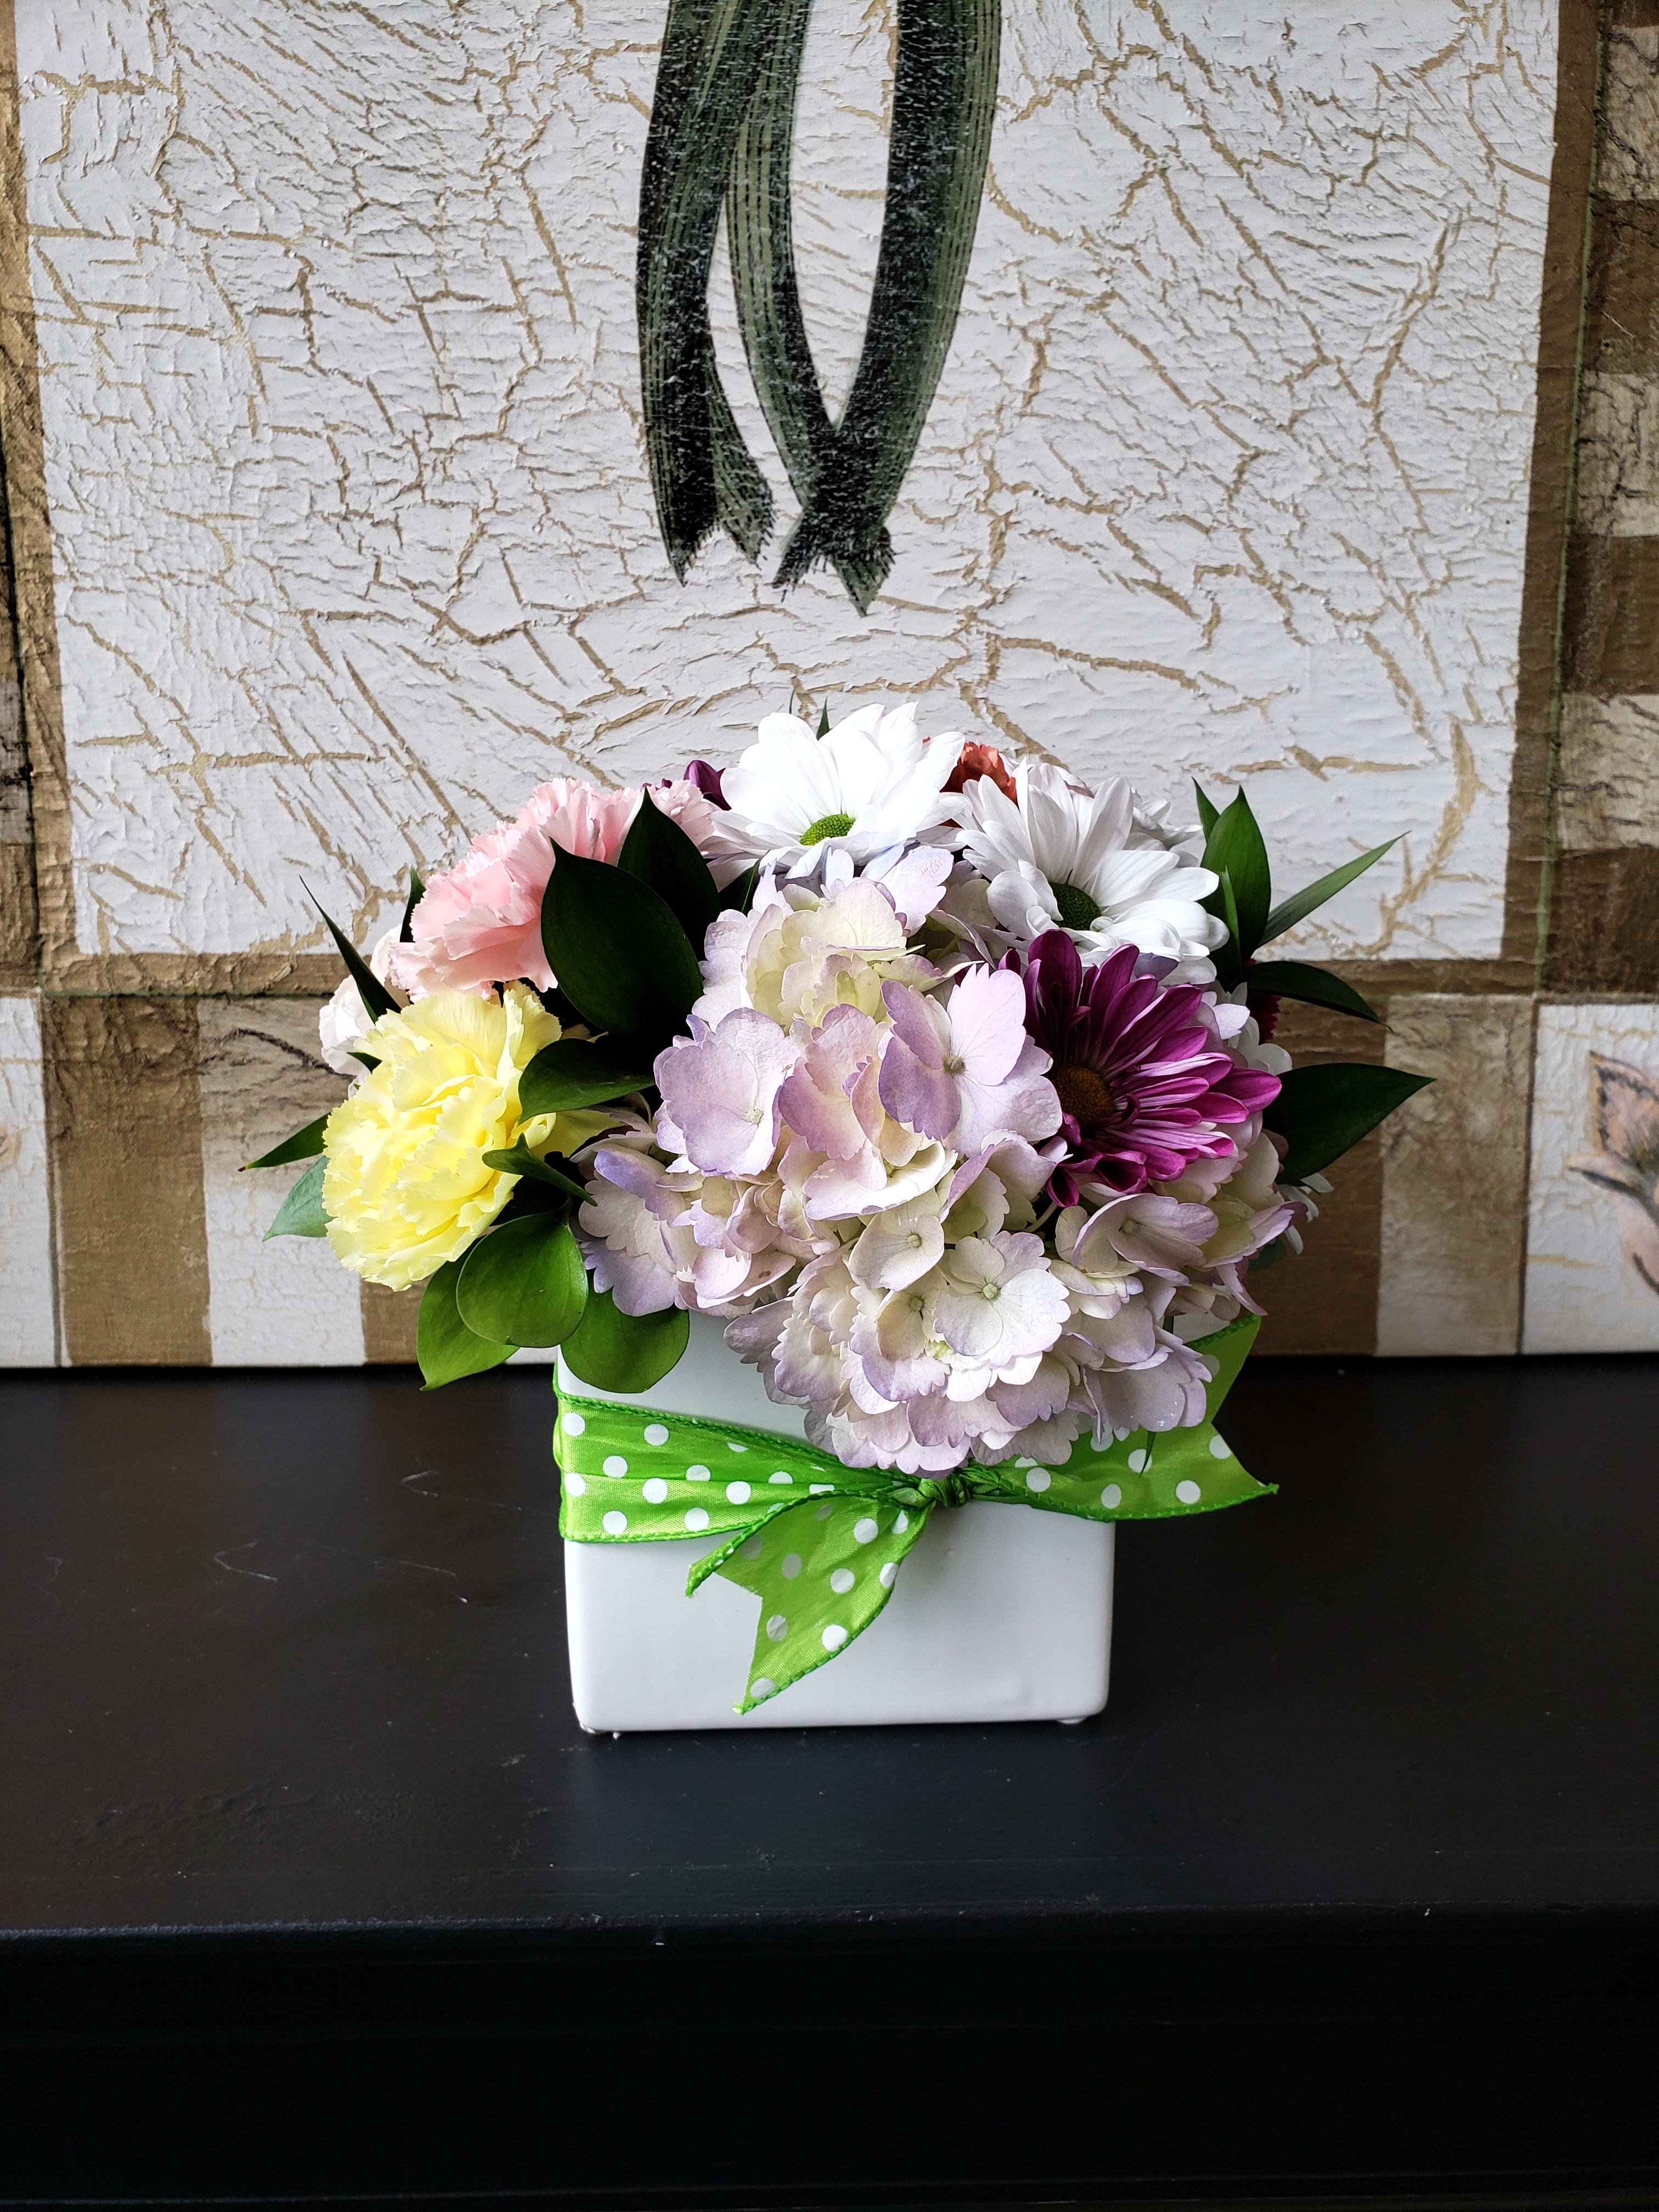 Seasonal Cube Arrangement (Assorted Seasonal Flowers) - Assorted Seasonal Flowers tastefully arranged in a white ceramic cube. Sealed with a fun bow for that added pop of color. For upgrade options or special requests, please contact our shop directly at 732-341-3723.   * Seasonal flowers may vary based on availability. 